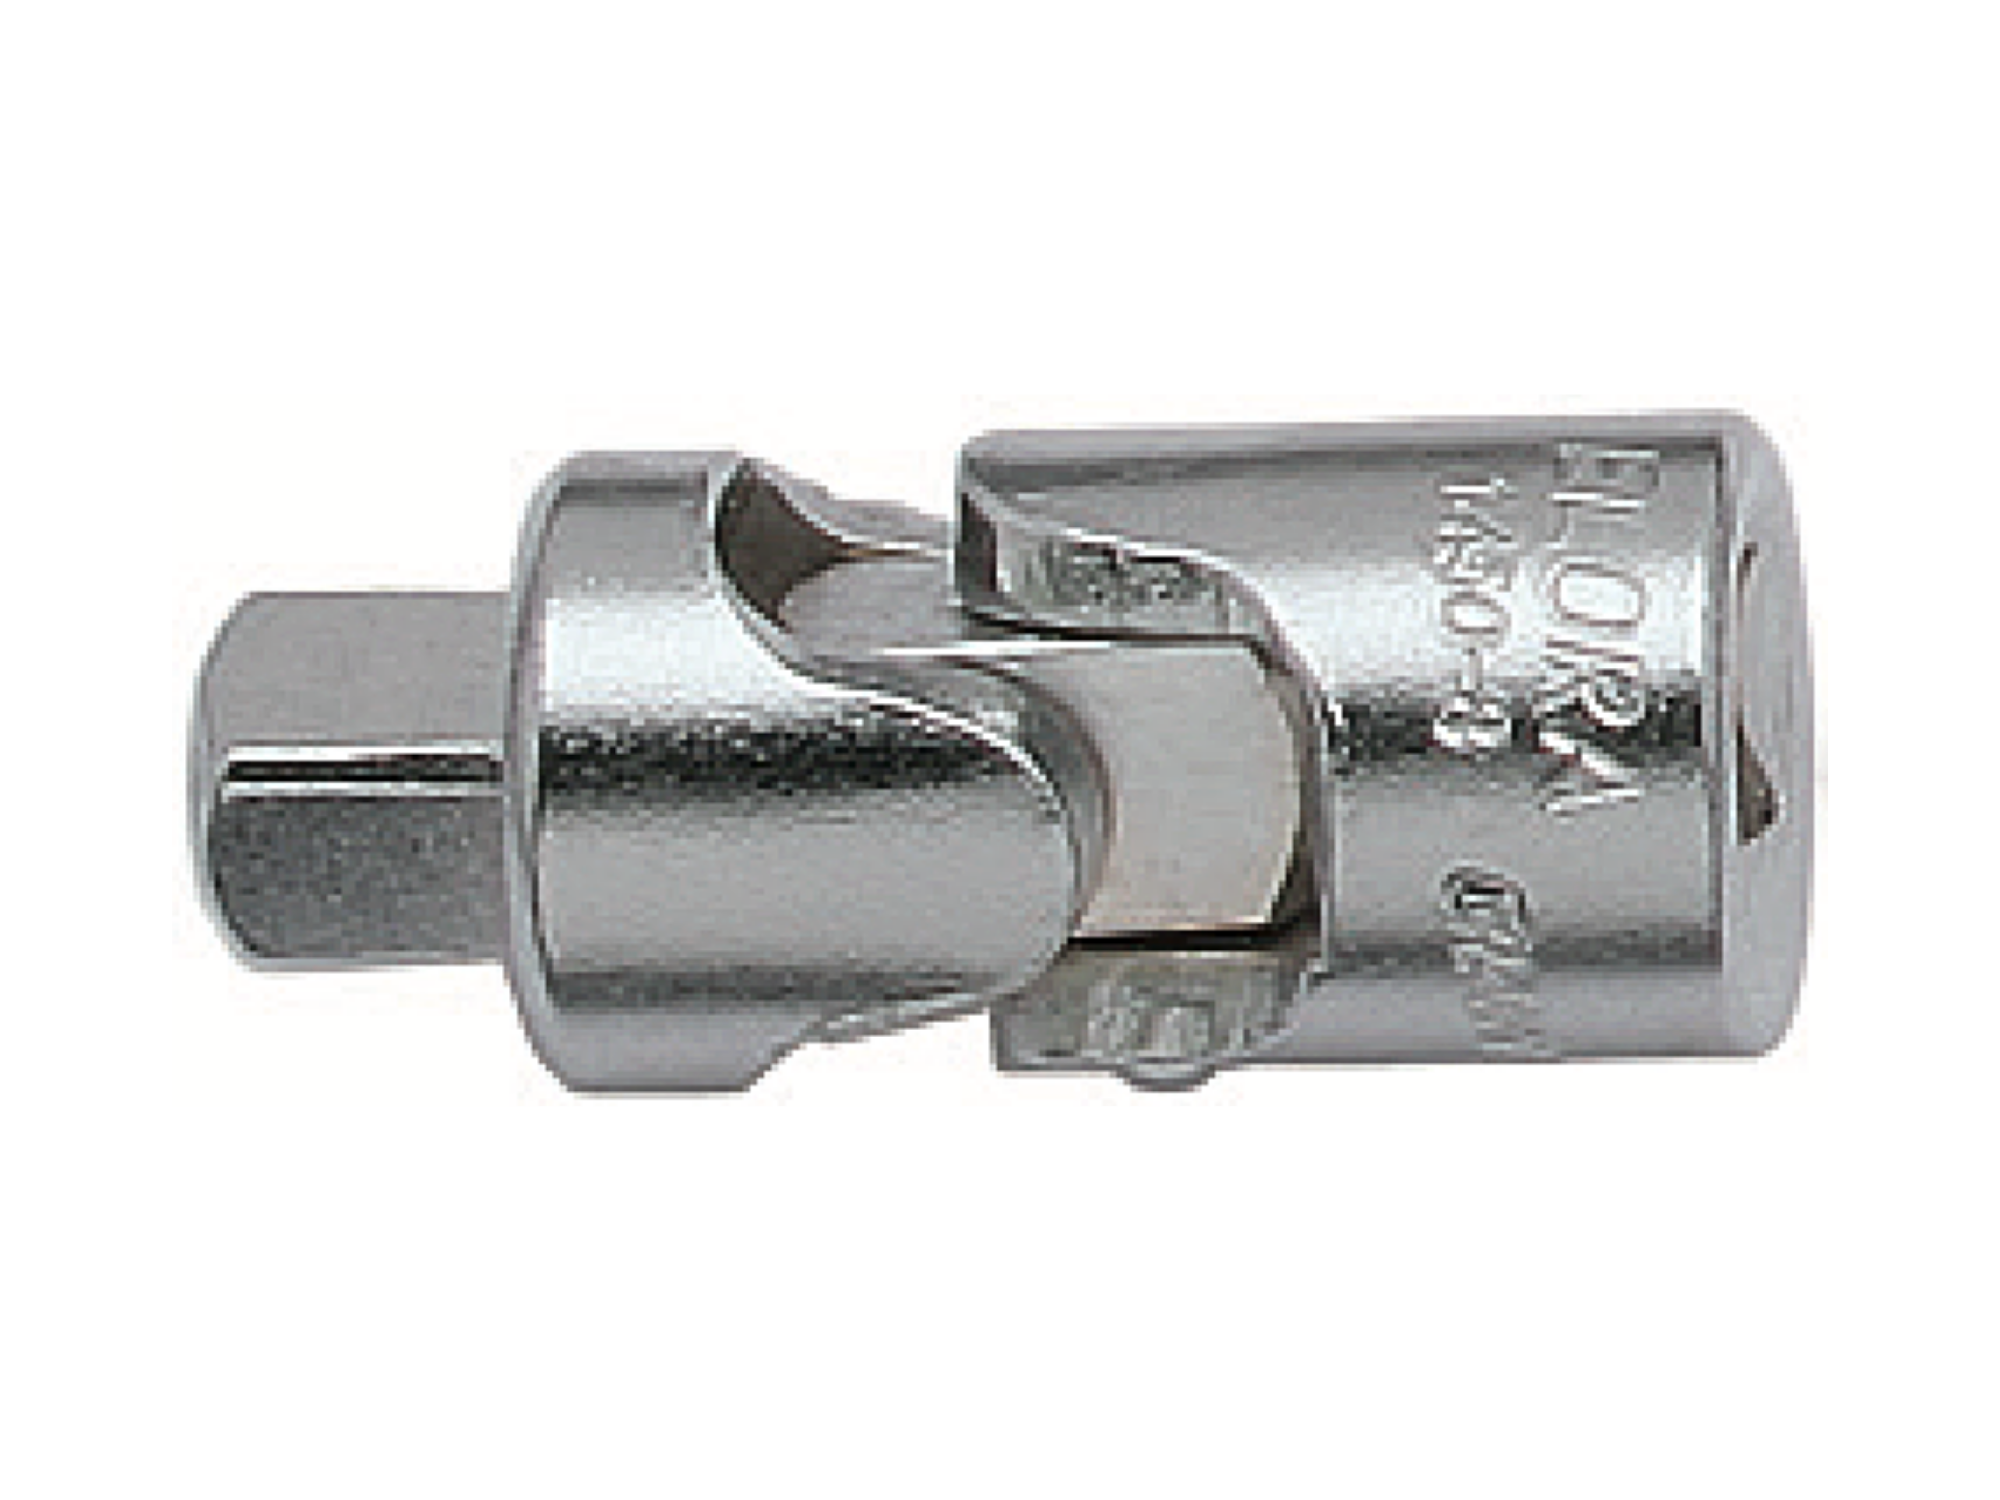 ELORA 1450-8 1/4" Universal Joint (ELORA Tools) - Premium 1/4" Universal Joint from ELORA - Shop now at Yew Aik.